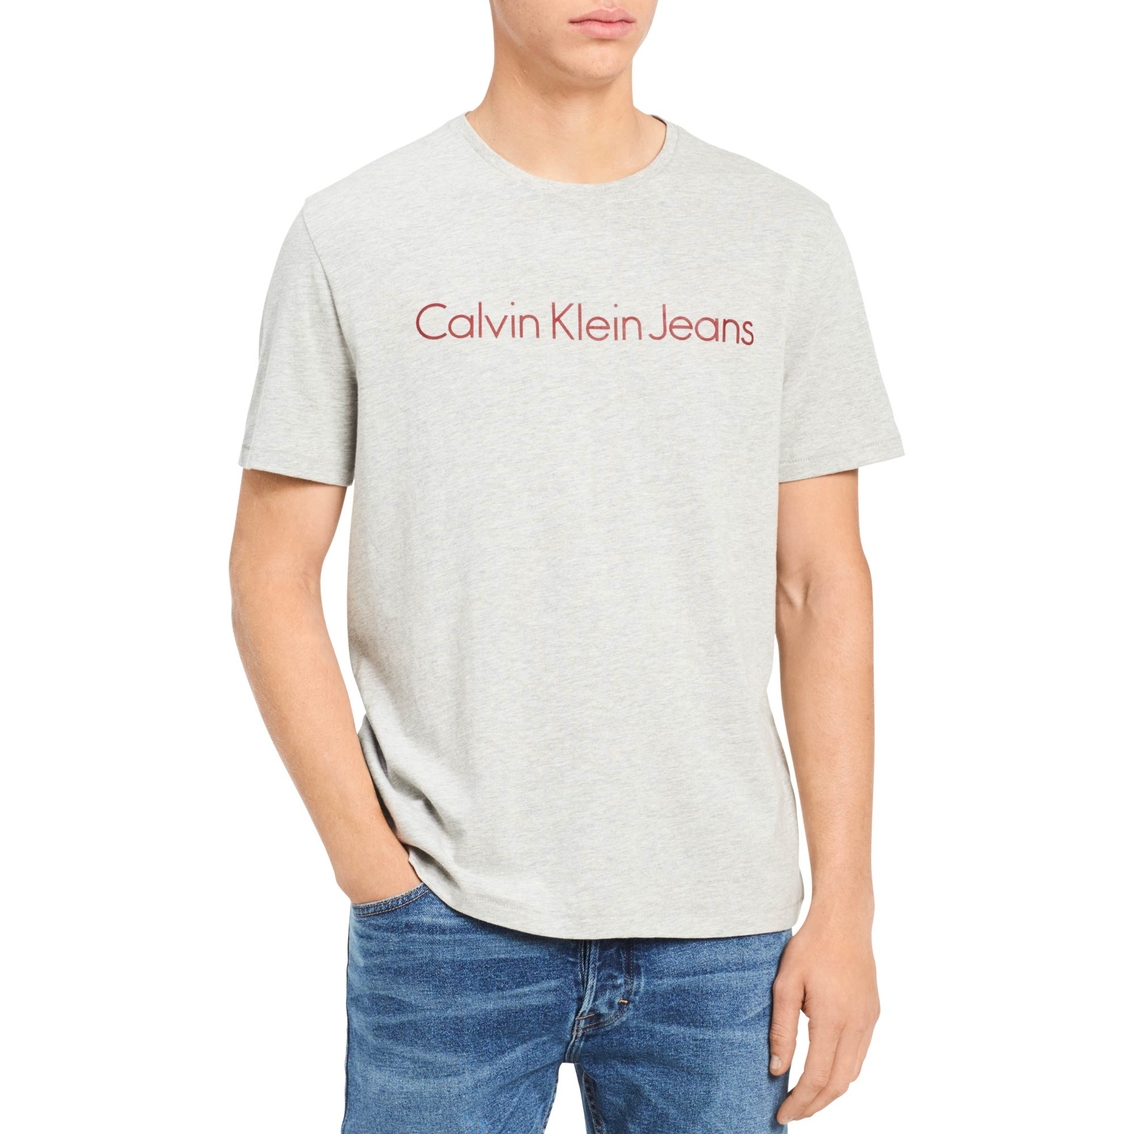 Calvin Klein Jeans Hd Crew Neck Tee | Shirts | Clothing & Accessories ...